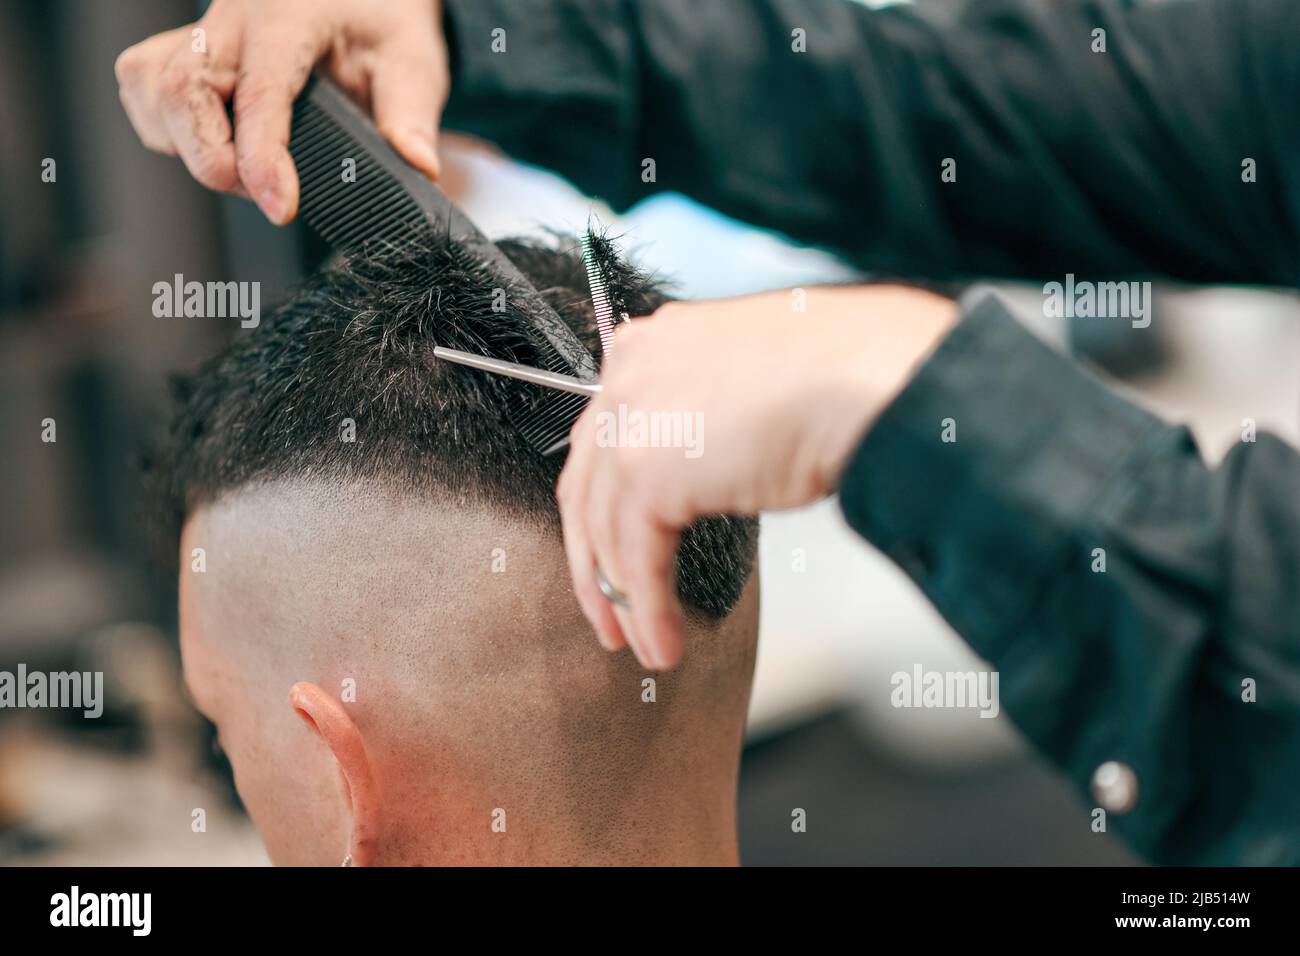 Crop unrecognizable barber cutting black hair of anonymous male client with sharp scissors in modern hairdressing salon on blurred background Stock Photo